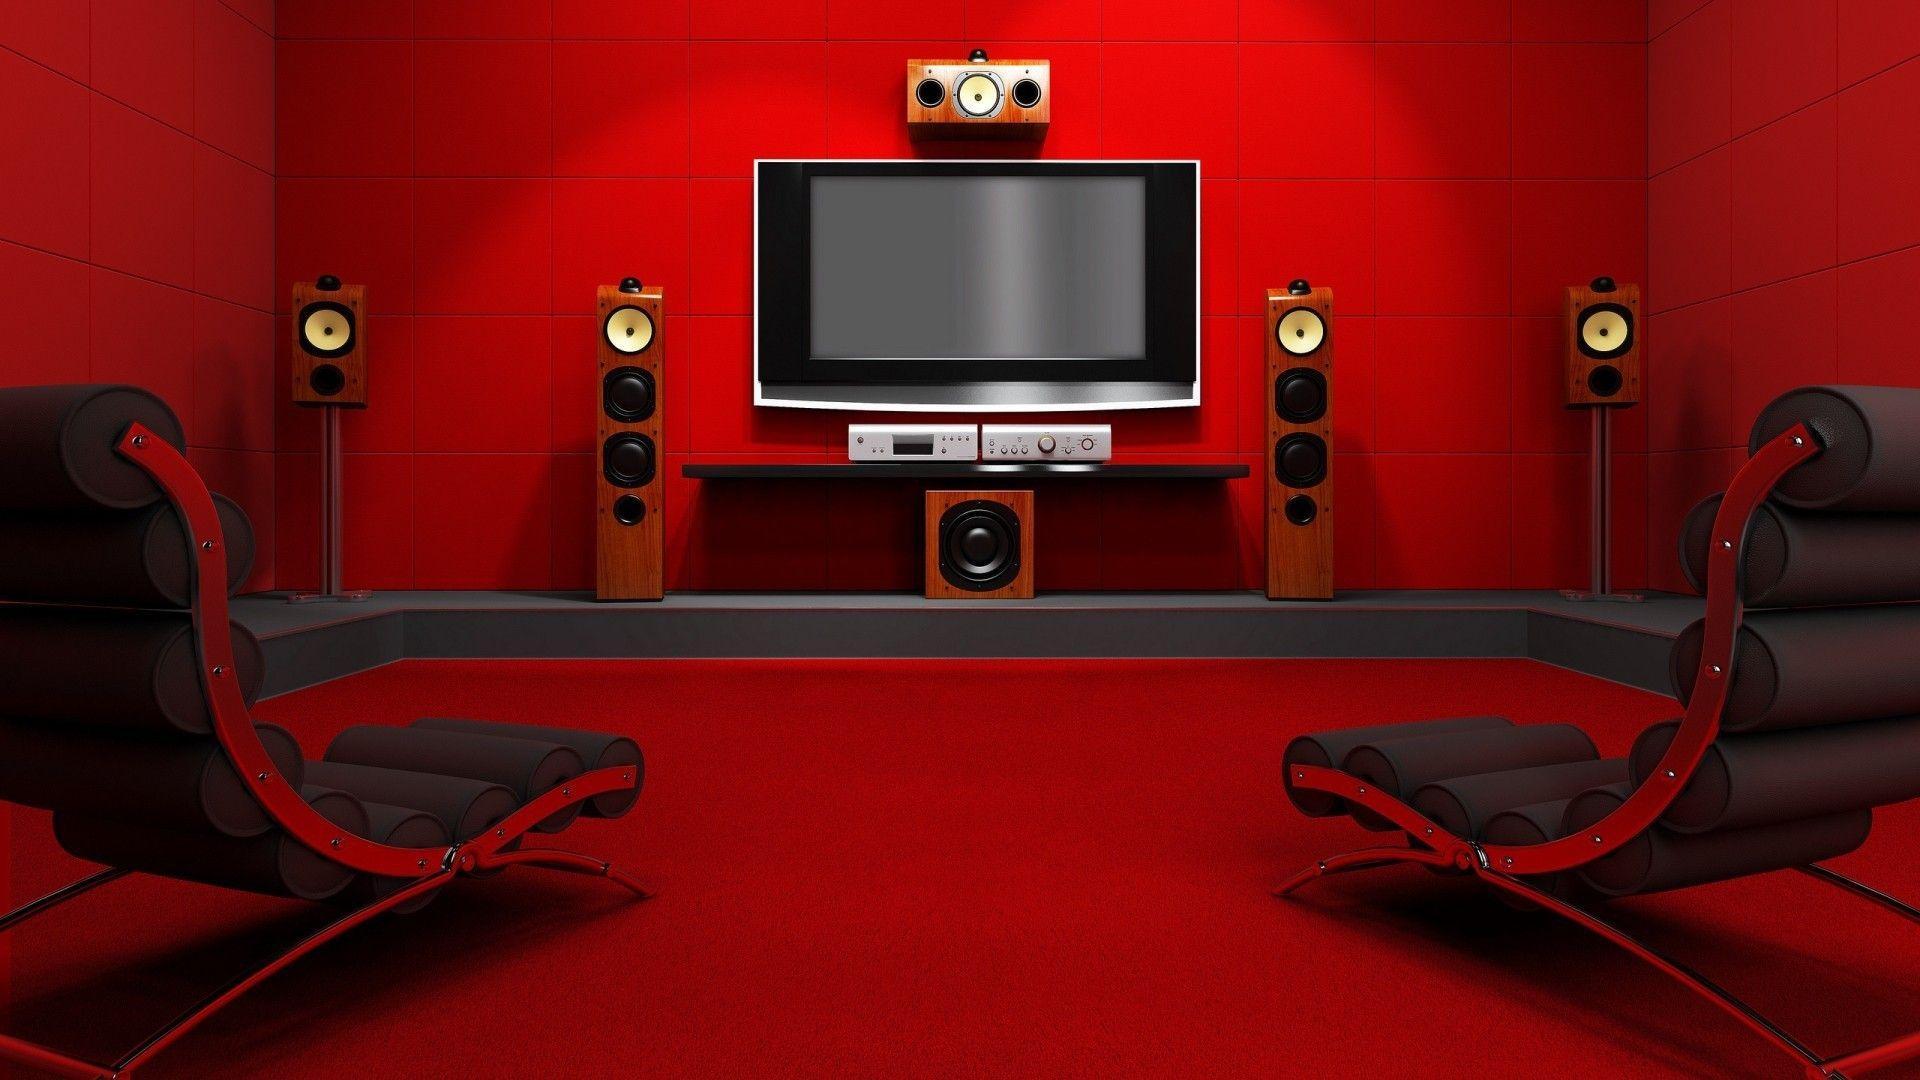 Making Home Cinema wallpaper and image, picture